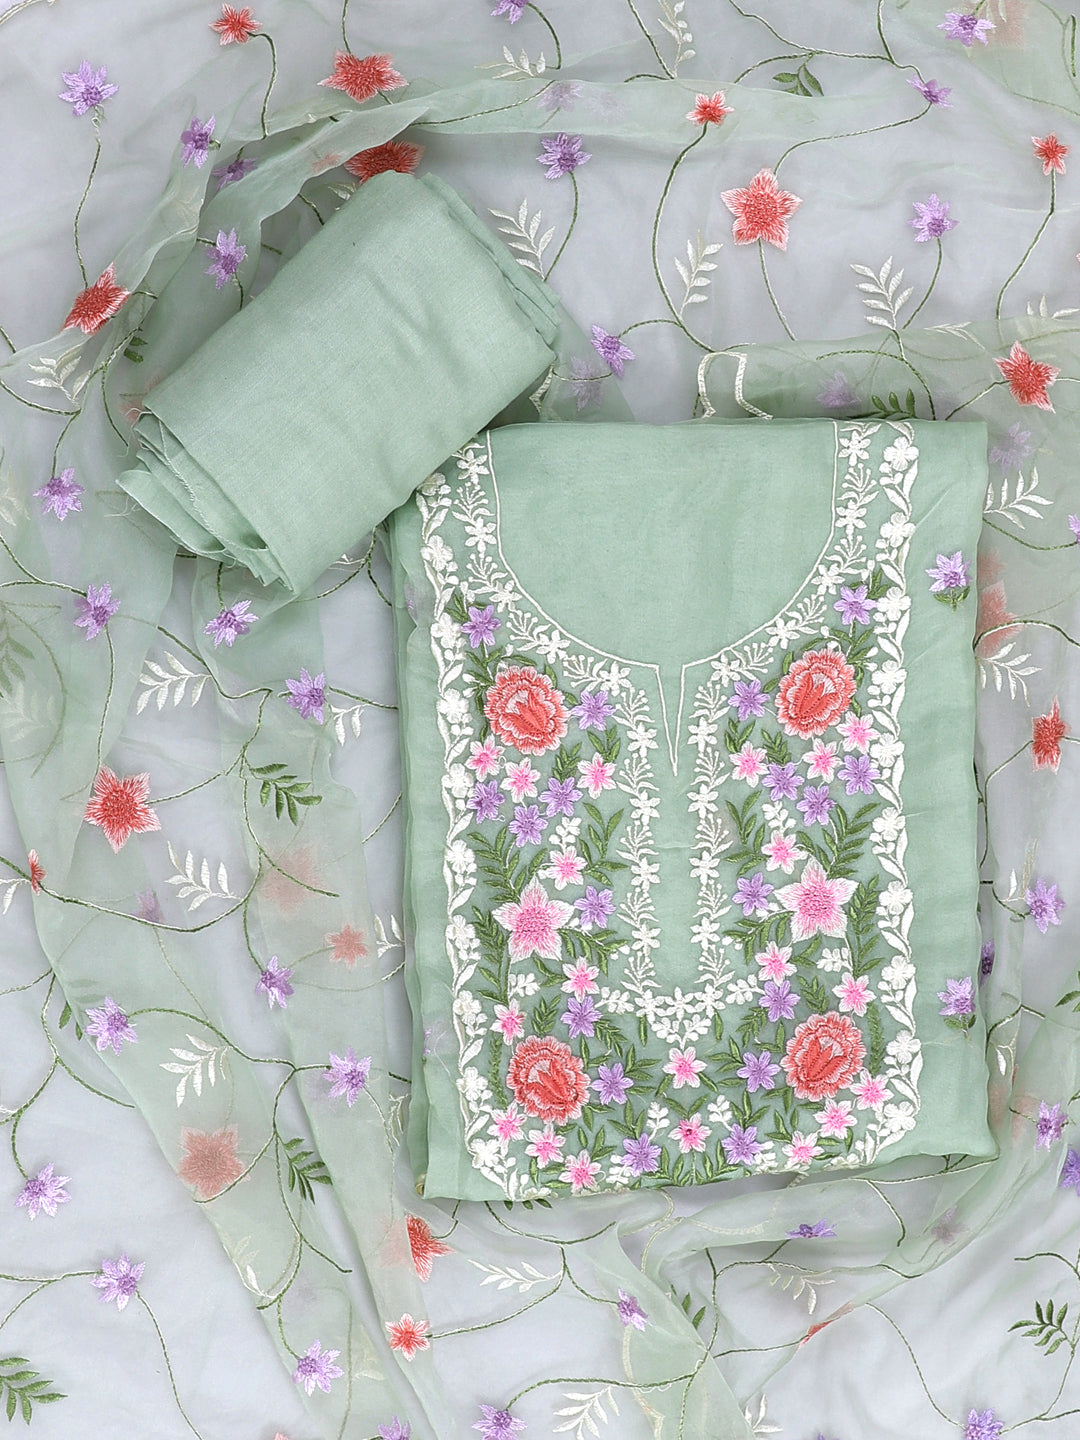 Green Yoke Embroidered Unstitch Dress Material with Dupatta